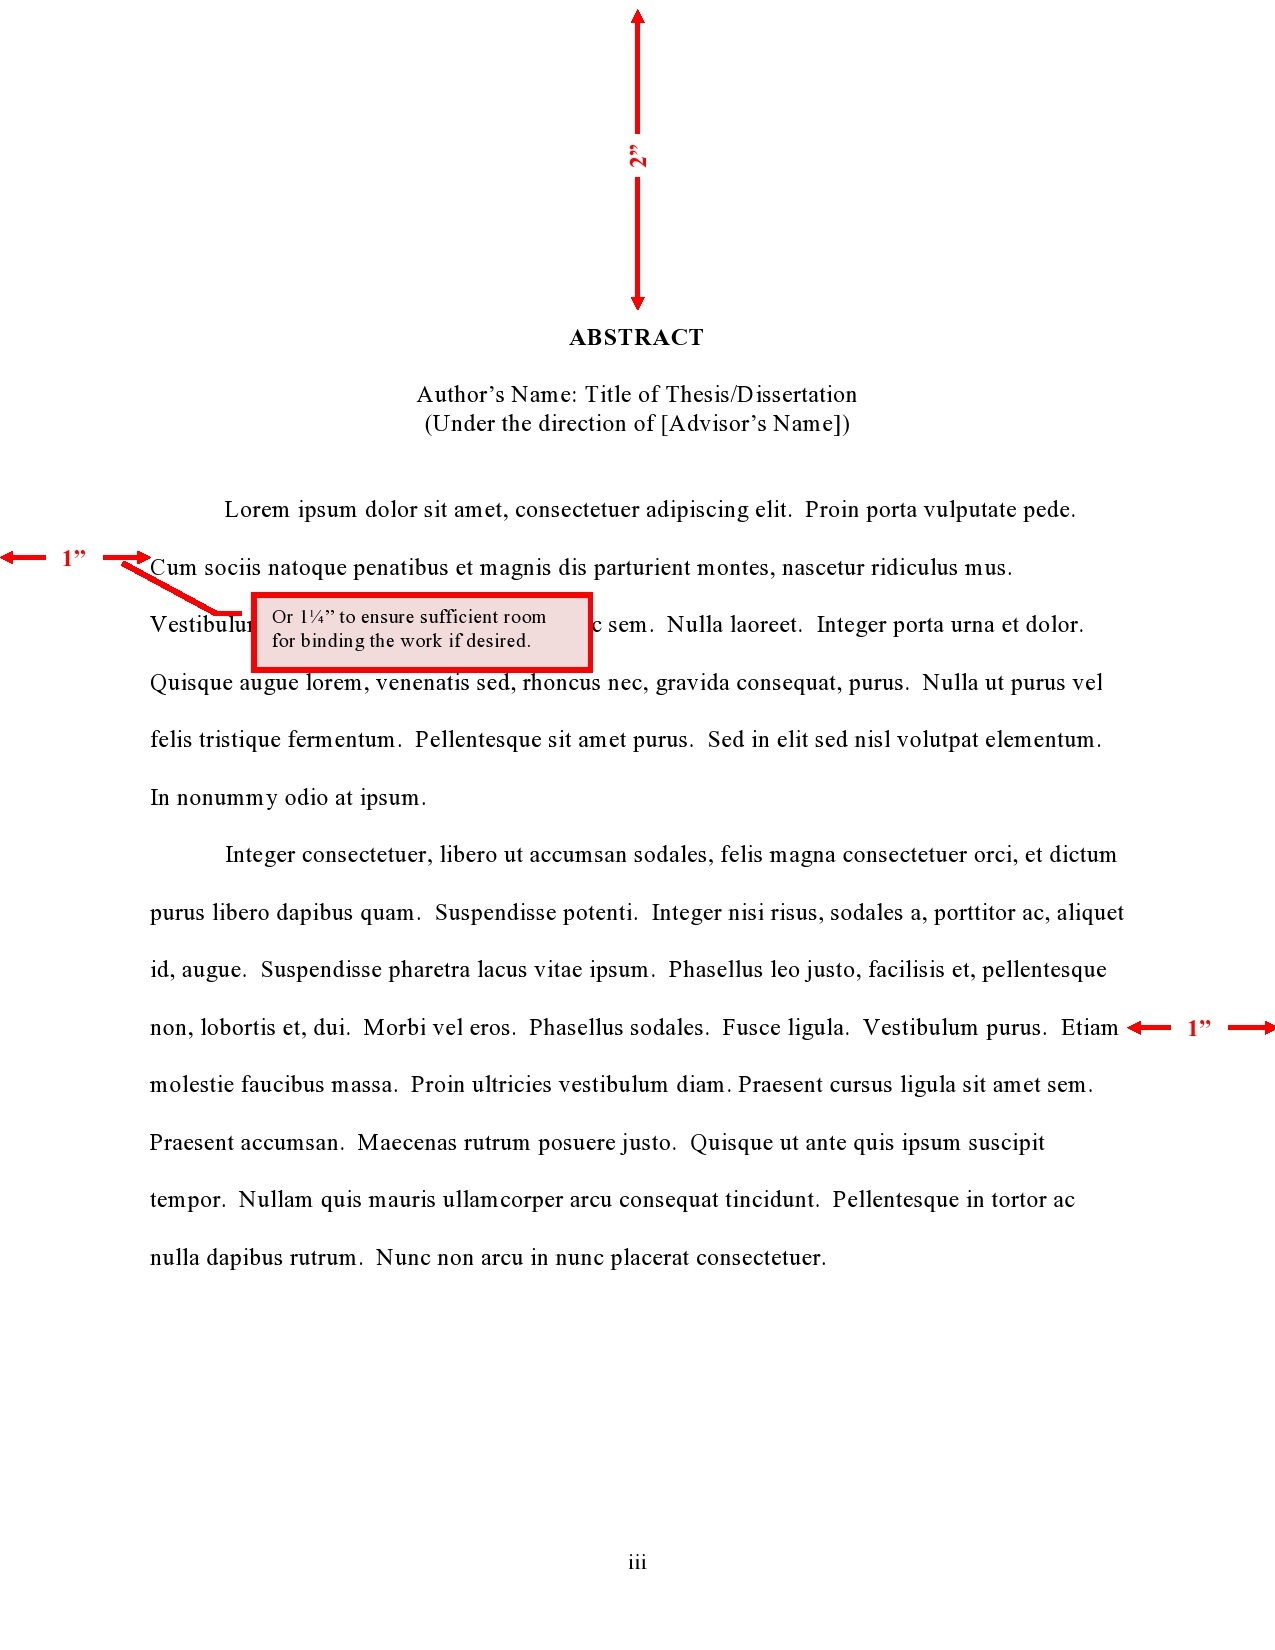 The Outline and Example of a Dissertation Proposal